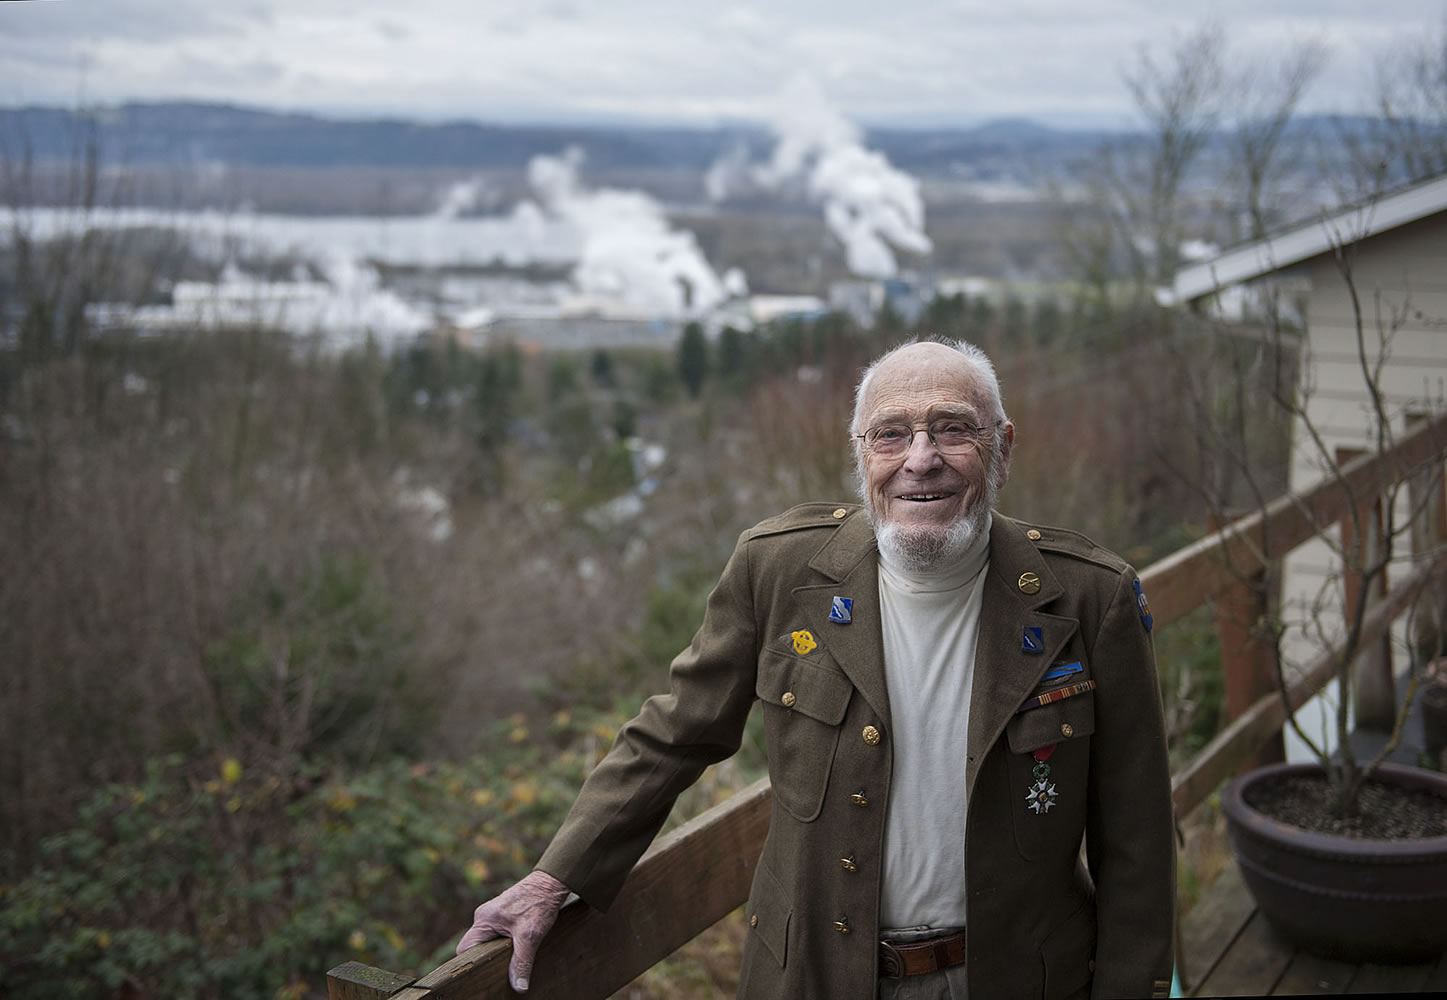 Dr. Ed McAninch, a longtime Camas physician, is a recent recipient of the Legion of Honor medal from the French government as one of the American veterans who helped liberate France during World War II.